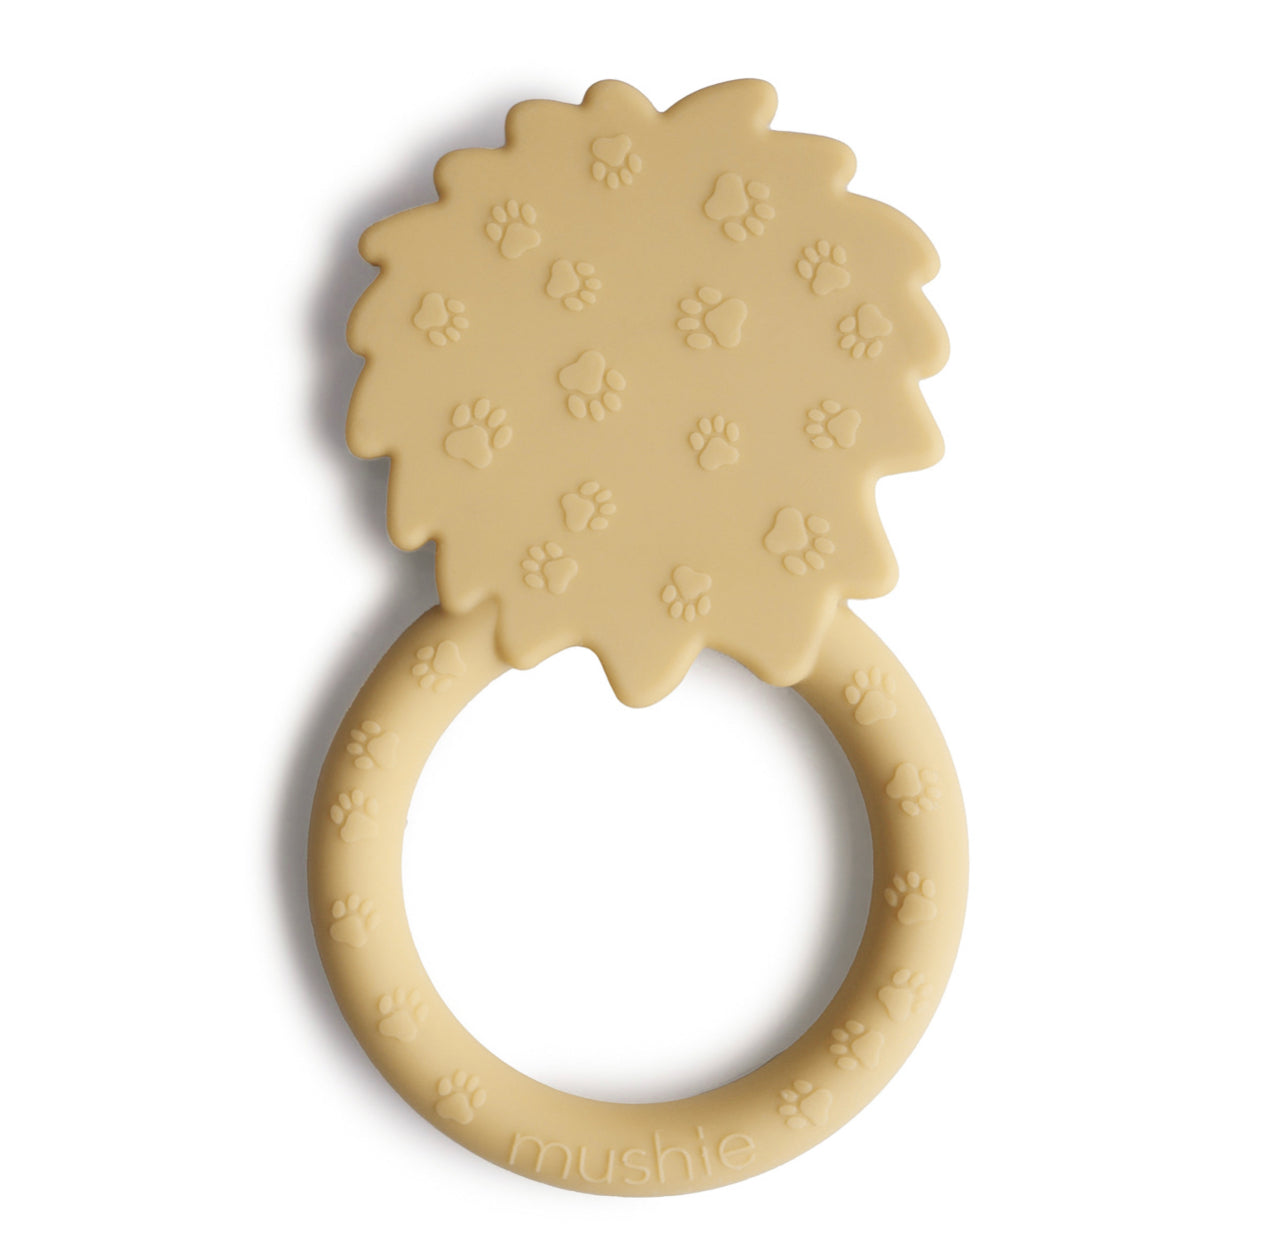 Lion Teether - Soft Yellow